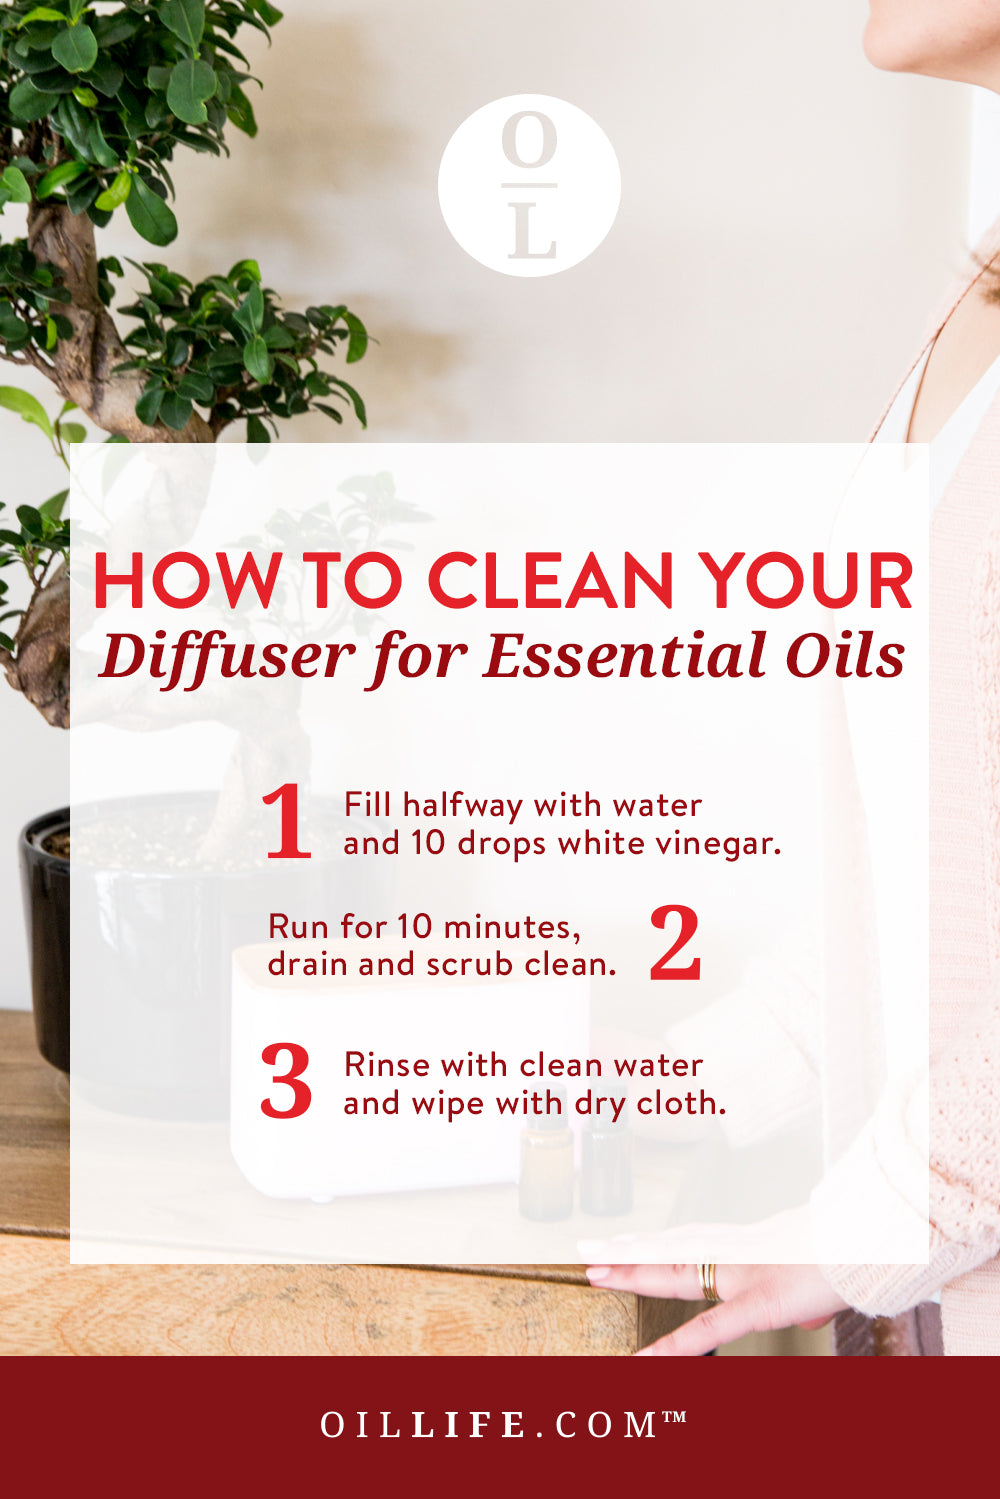 How to Clean Essential Oil Diffuser With Vinegar - 3 Steps